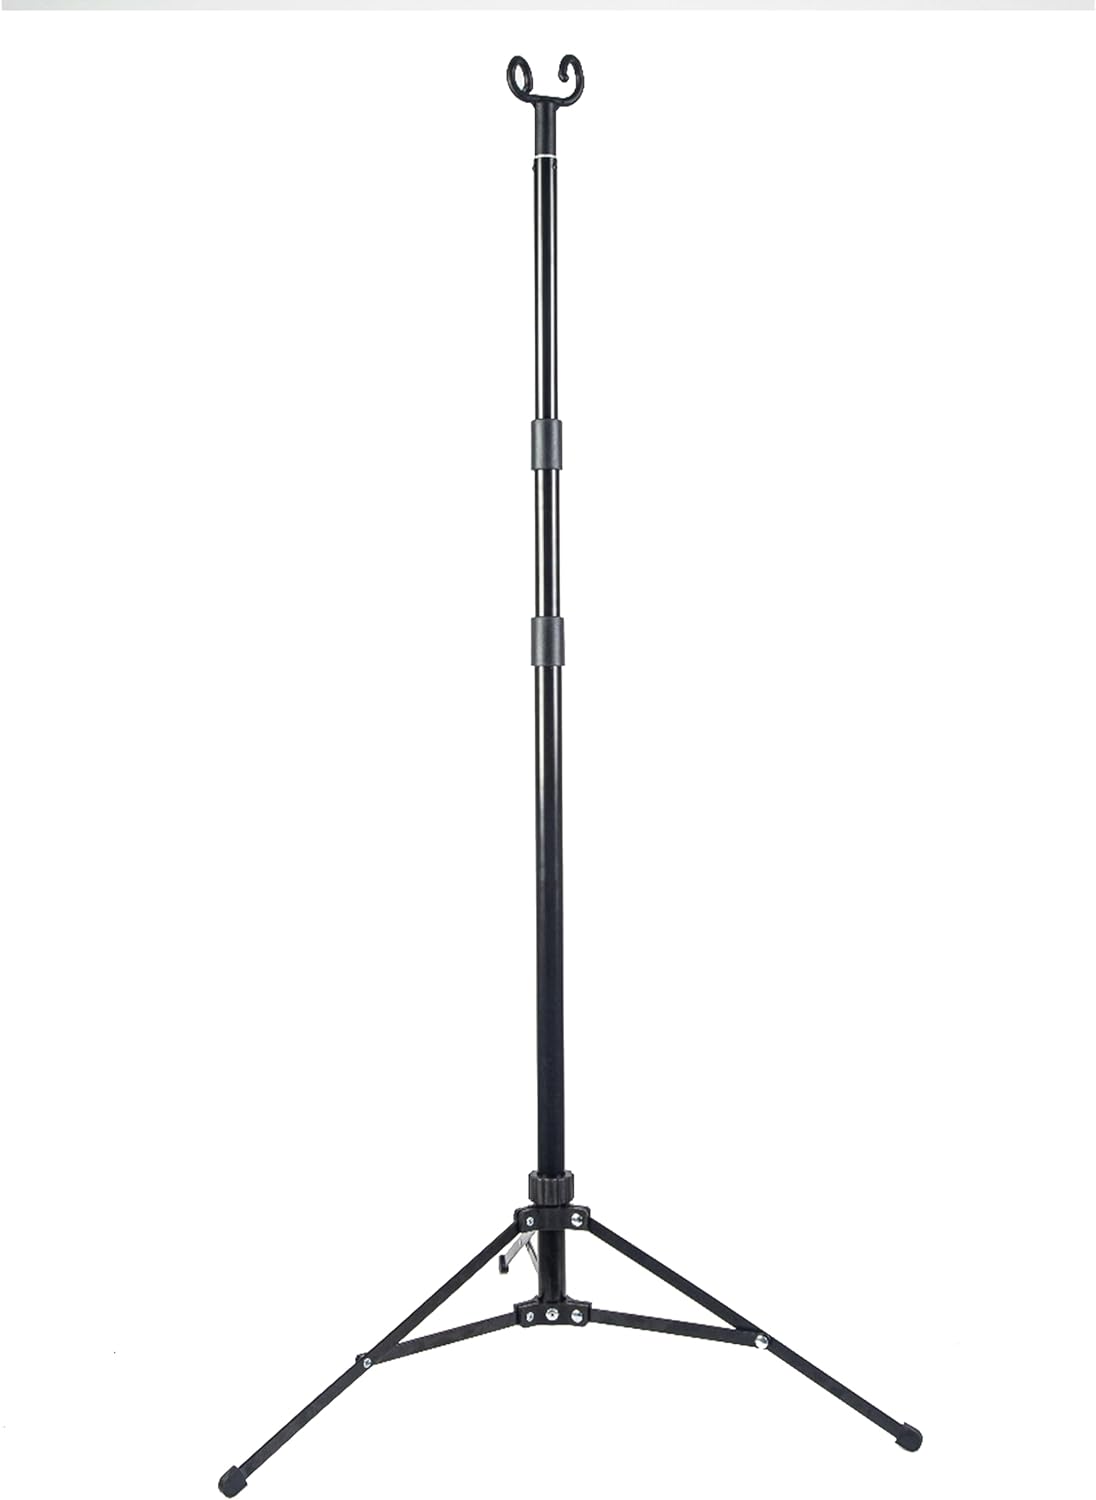 Versatile Tripod IV Poles Stand with Hooks | Collapsible Design | Floor Stand | Organizer Lanyard Rack | Portable Travel IV Poles for Tables, Keychains & More